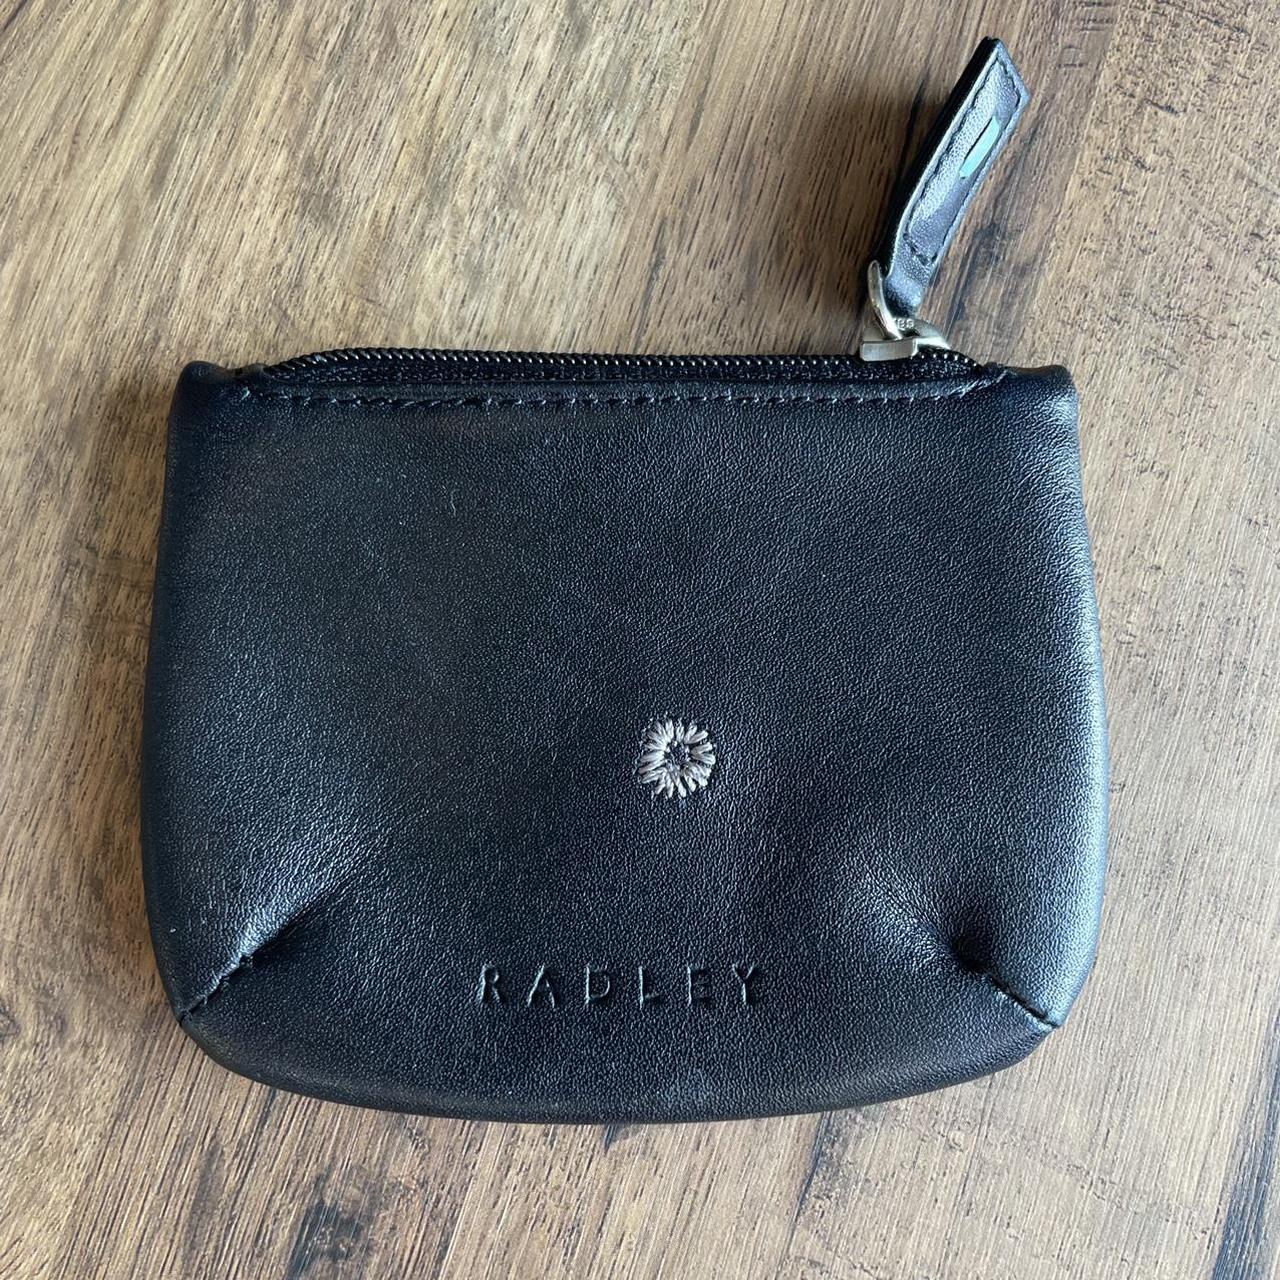 Women's Coin Purses at Radley London - Bags | Stylicy